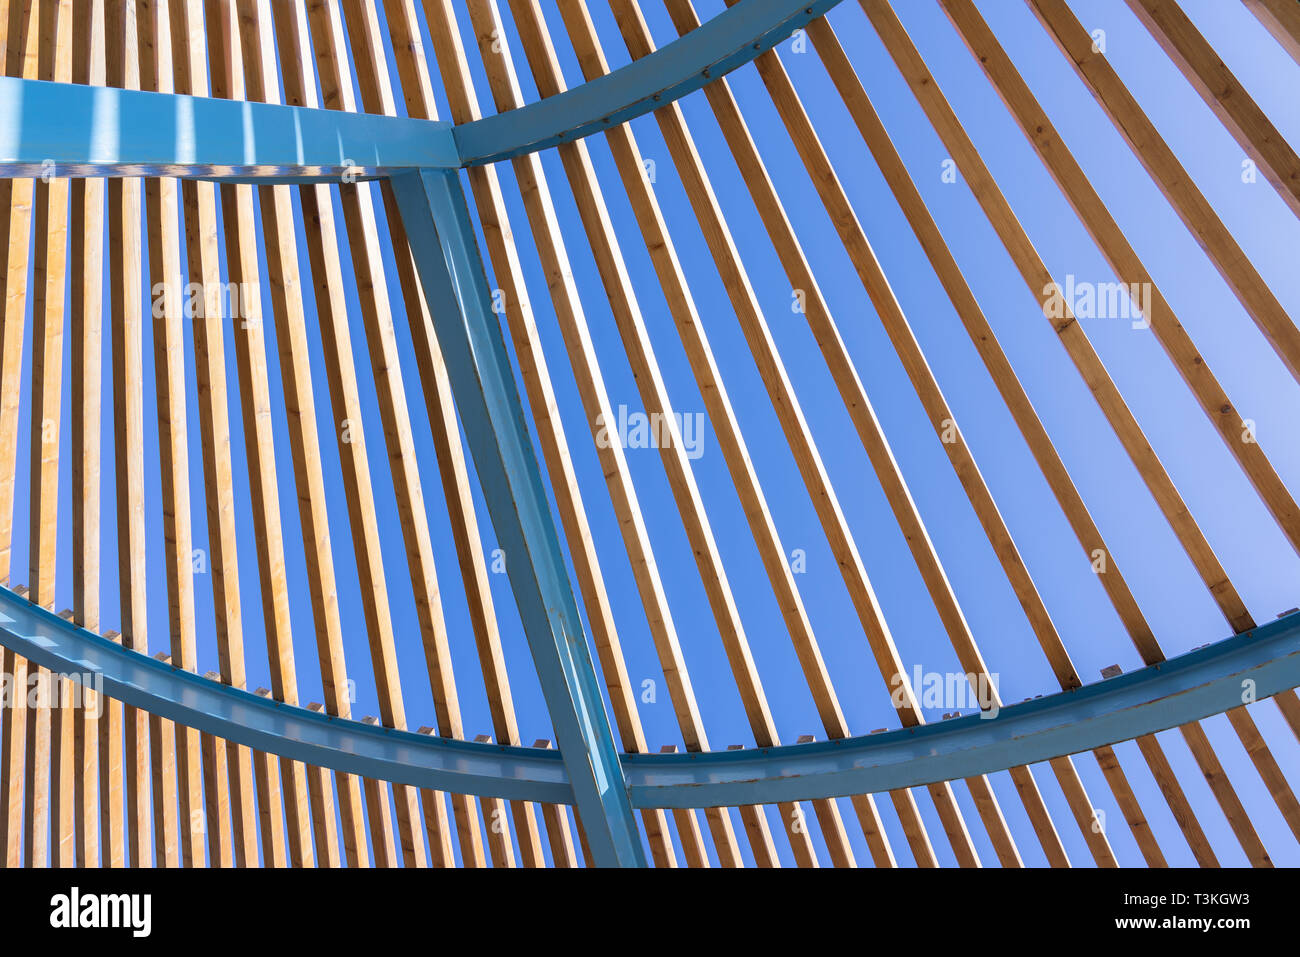 Architectural construction of metal with wooden slats Stock Photo